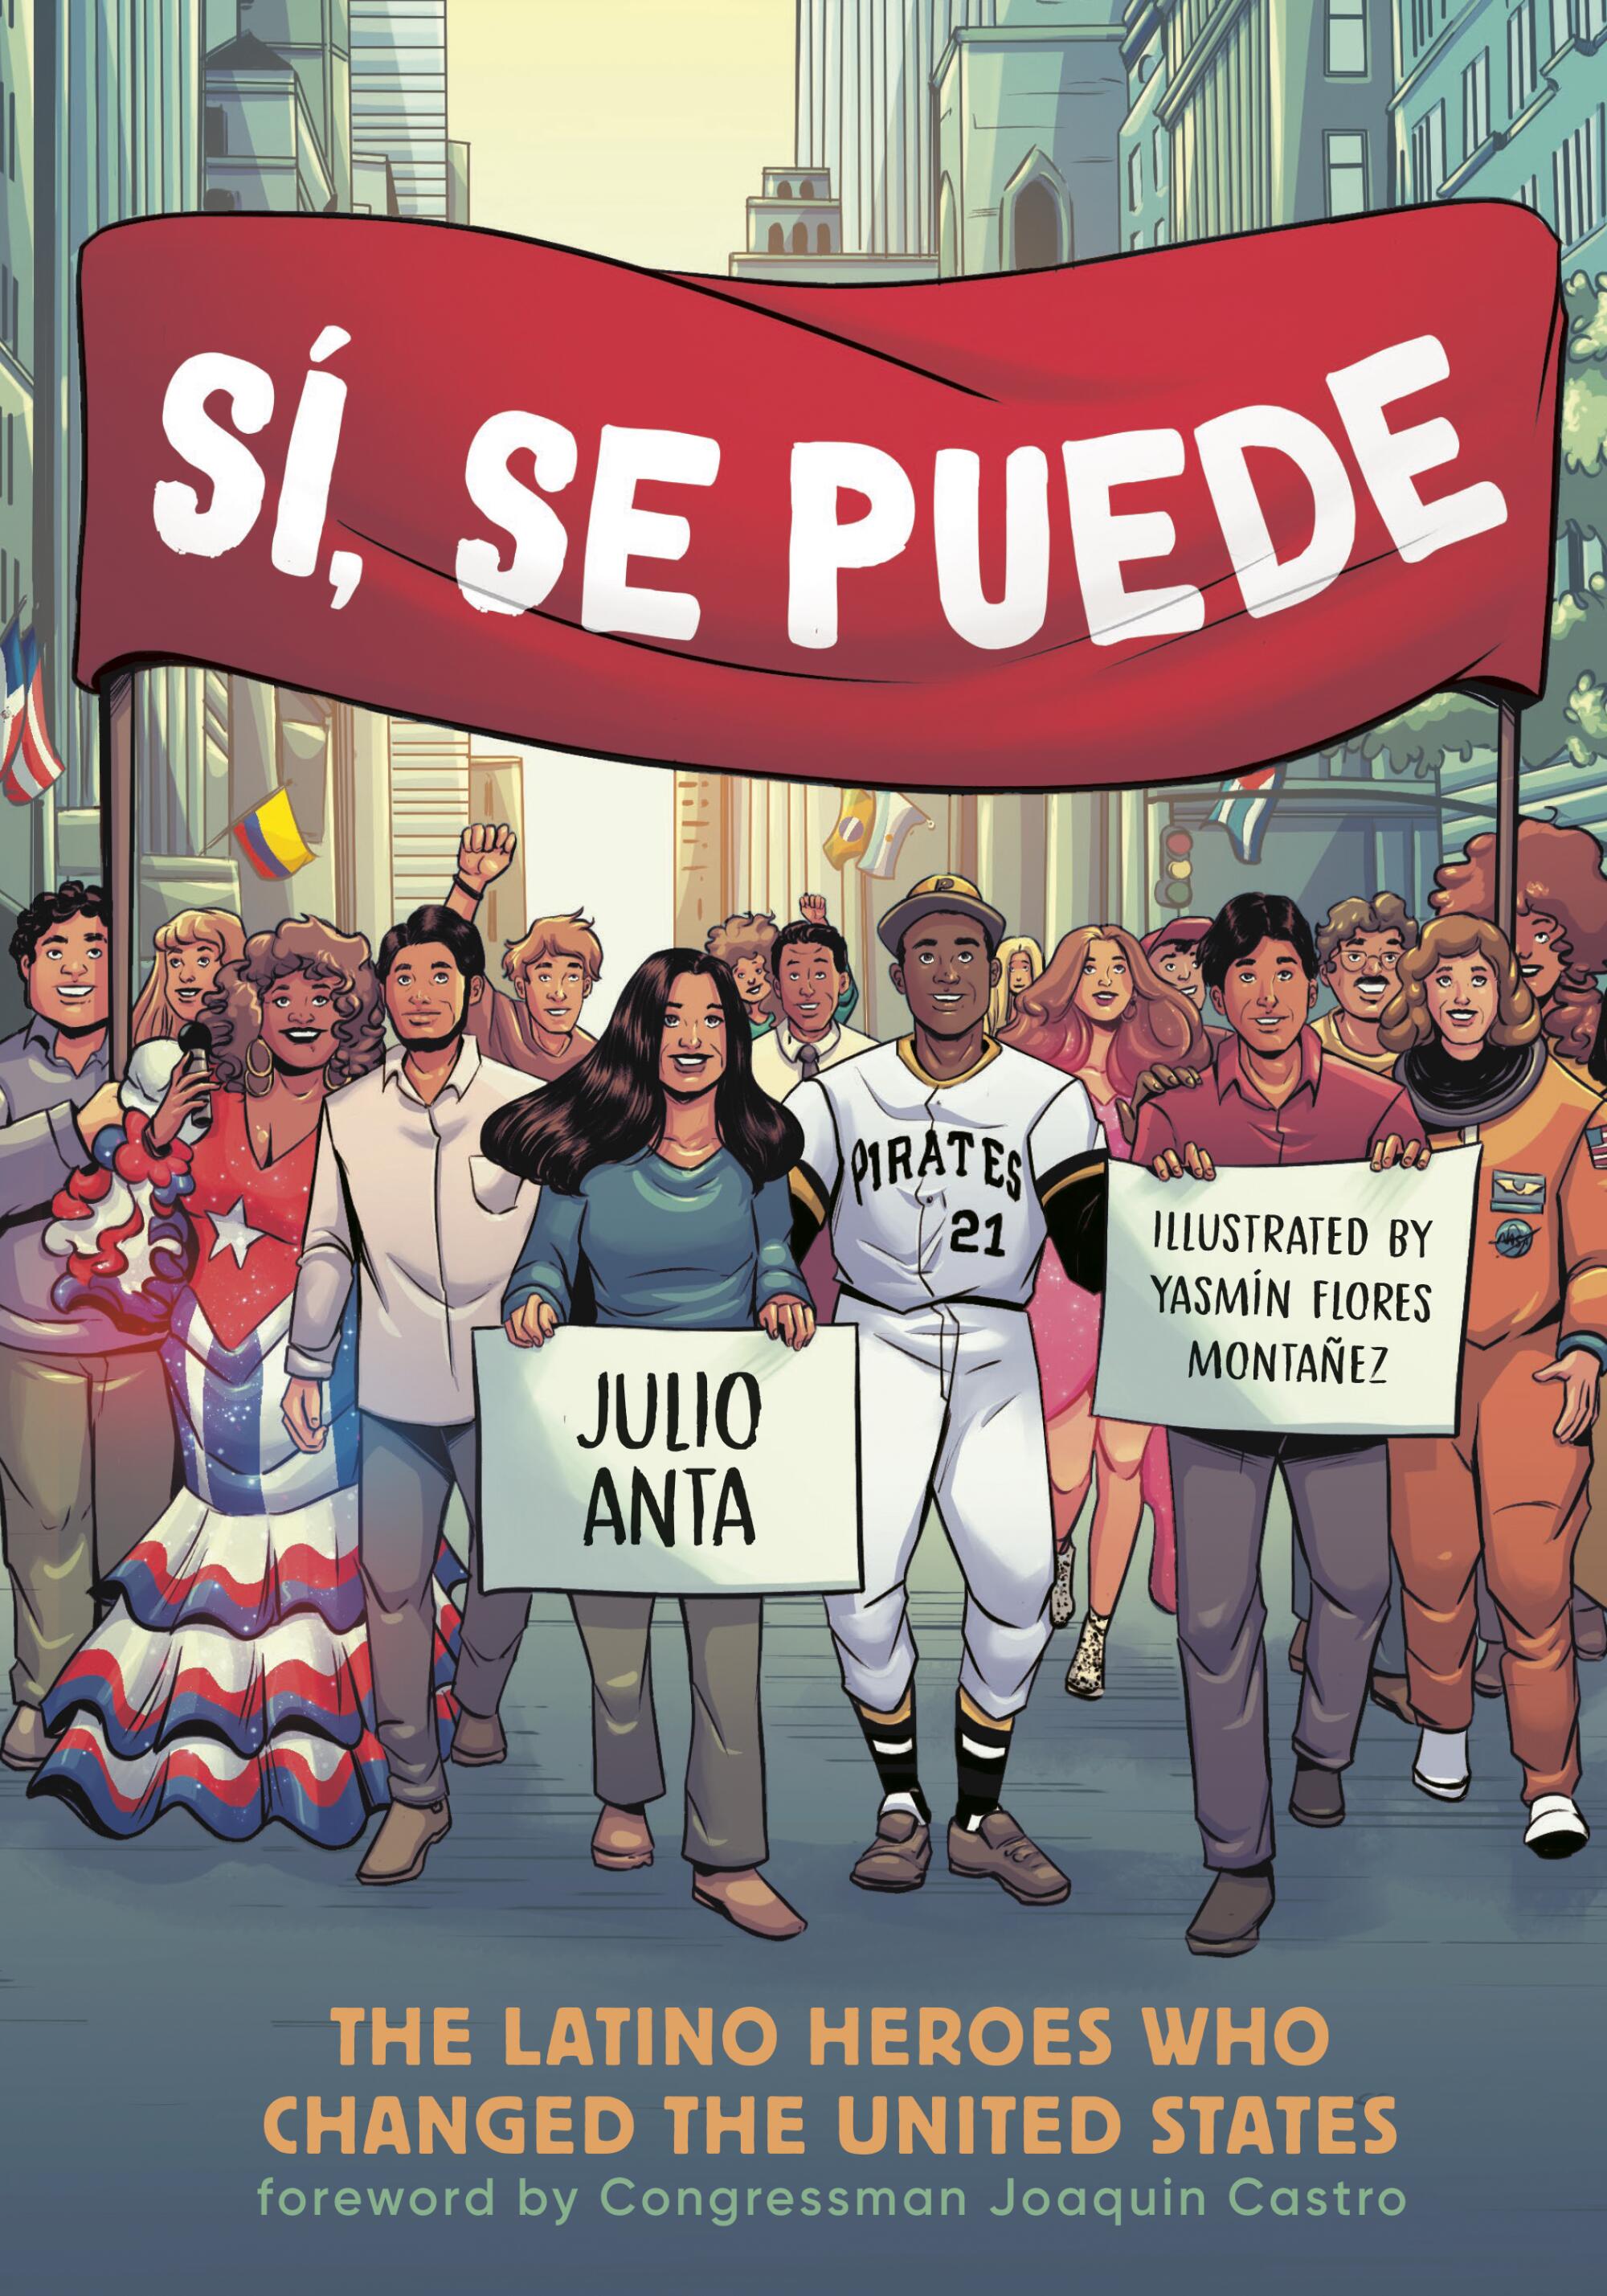 S?, SE PUEDE: The Latino Heroes Who Changed the United States

By Julio Anta

